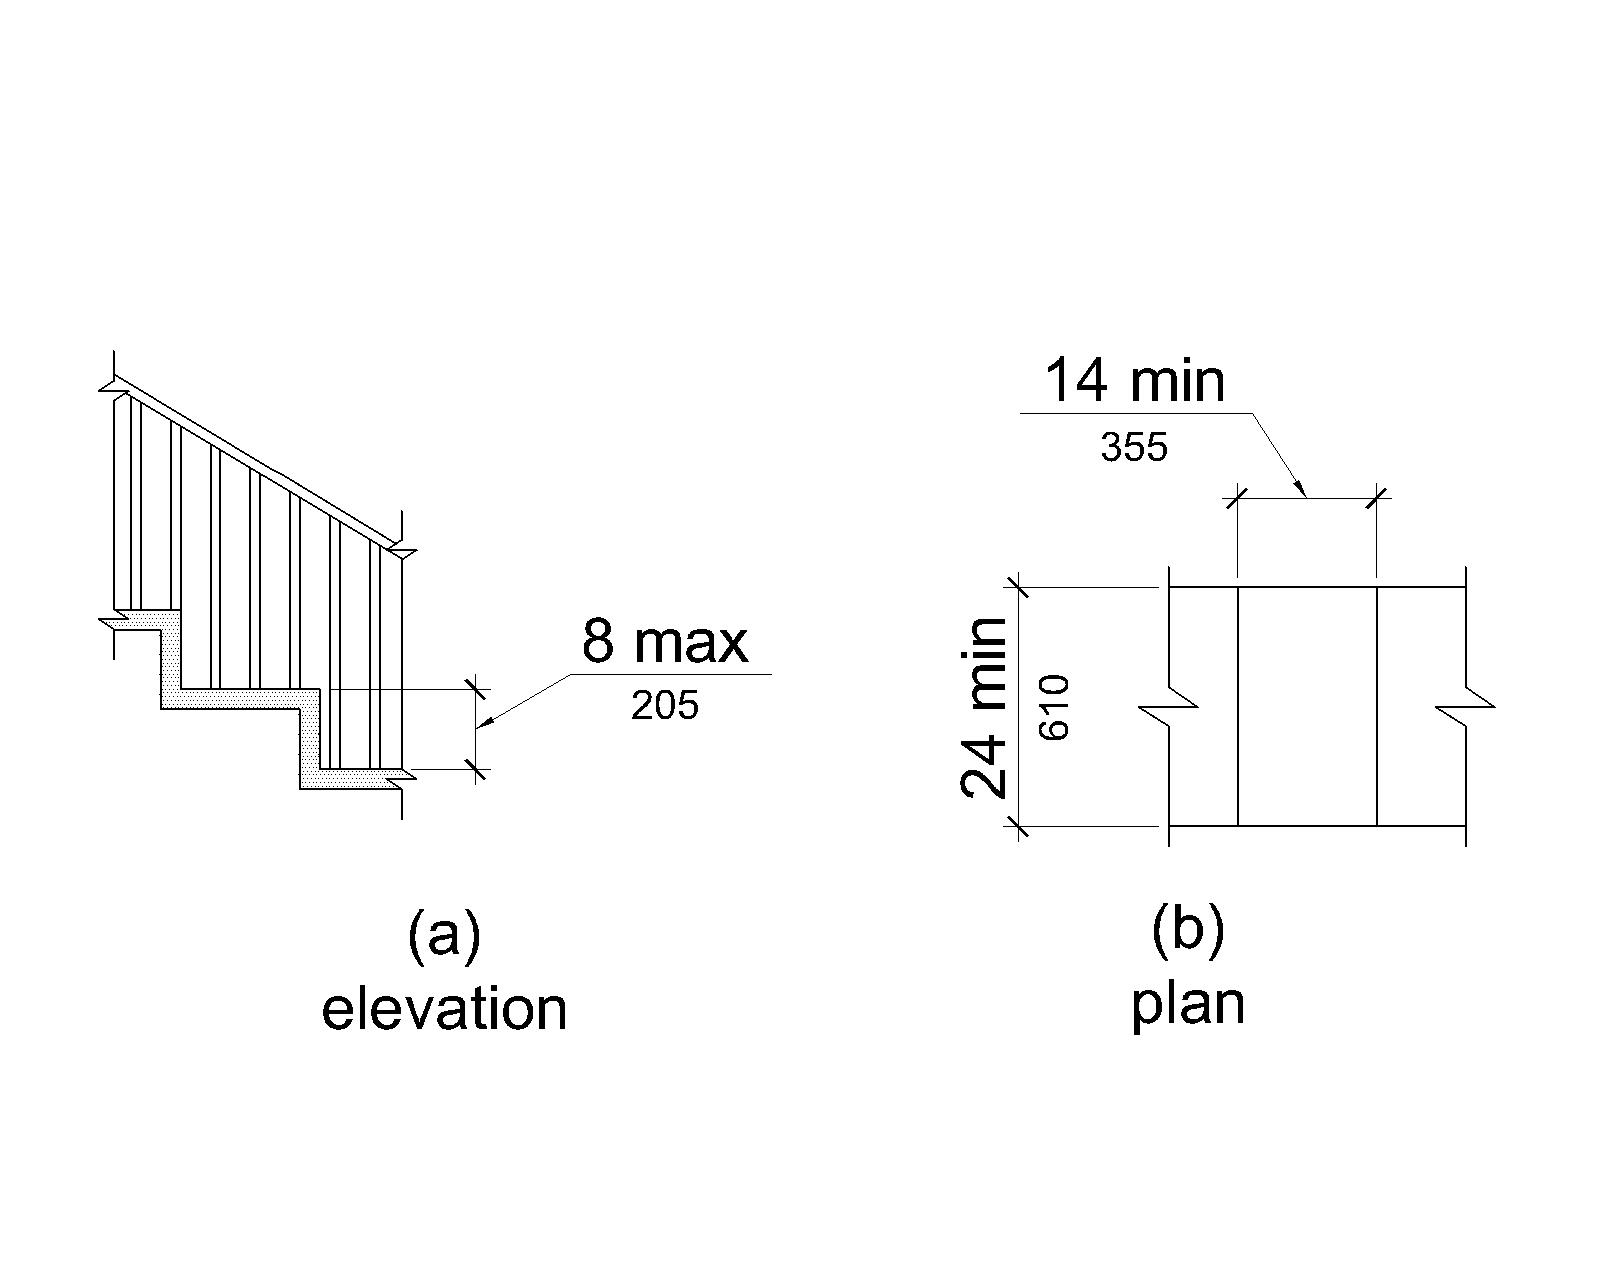 Figure (a) is an elevation drawing of a transfer step 8 inches (205 mm) high maximum.Figure (b) is a plan view of a transfer step that is 14 inches (355 mm) deep minimum and 24 inches (610 mm) long minimum.